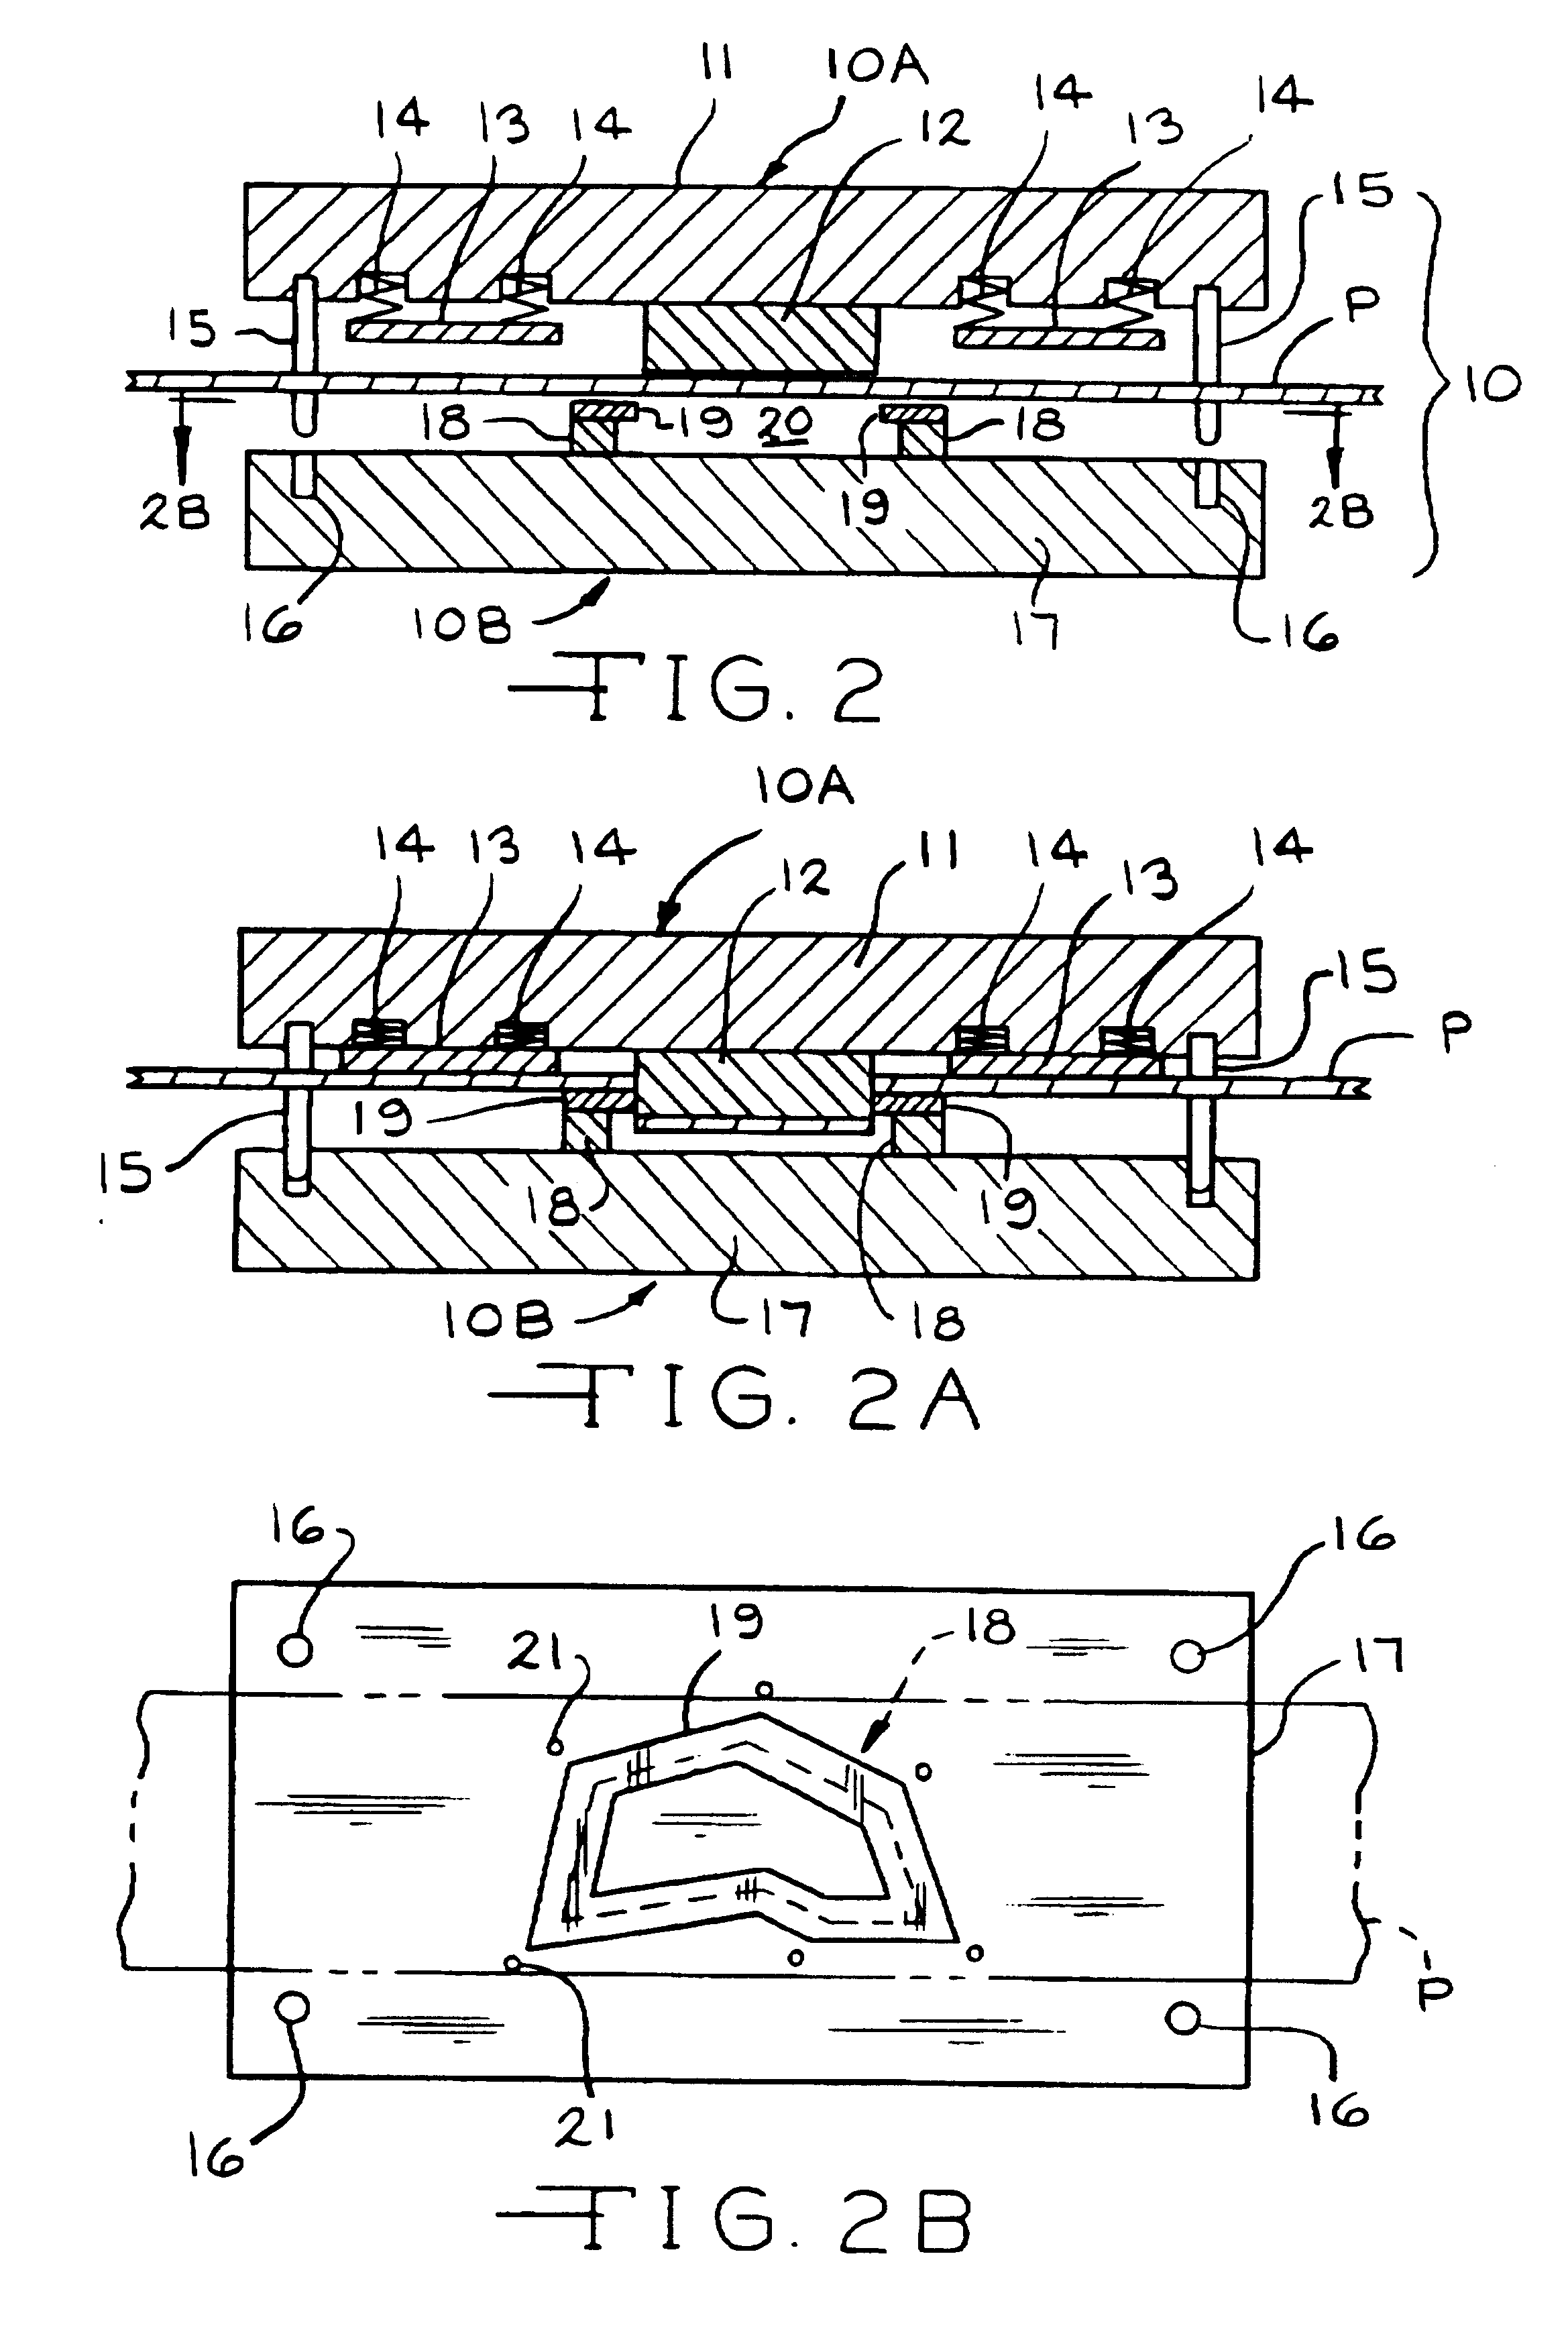 System and method for design and fabrication of stamping dies for making precise die blanks